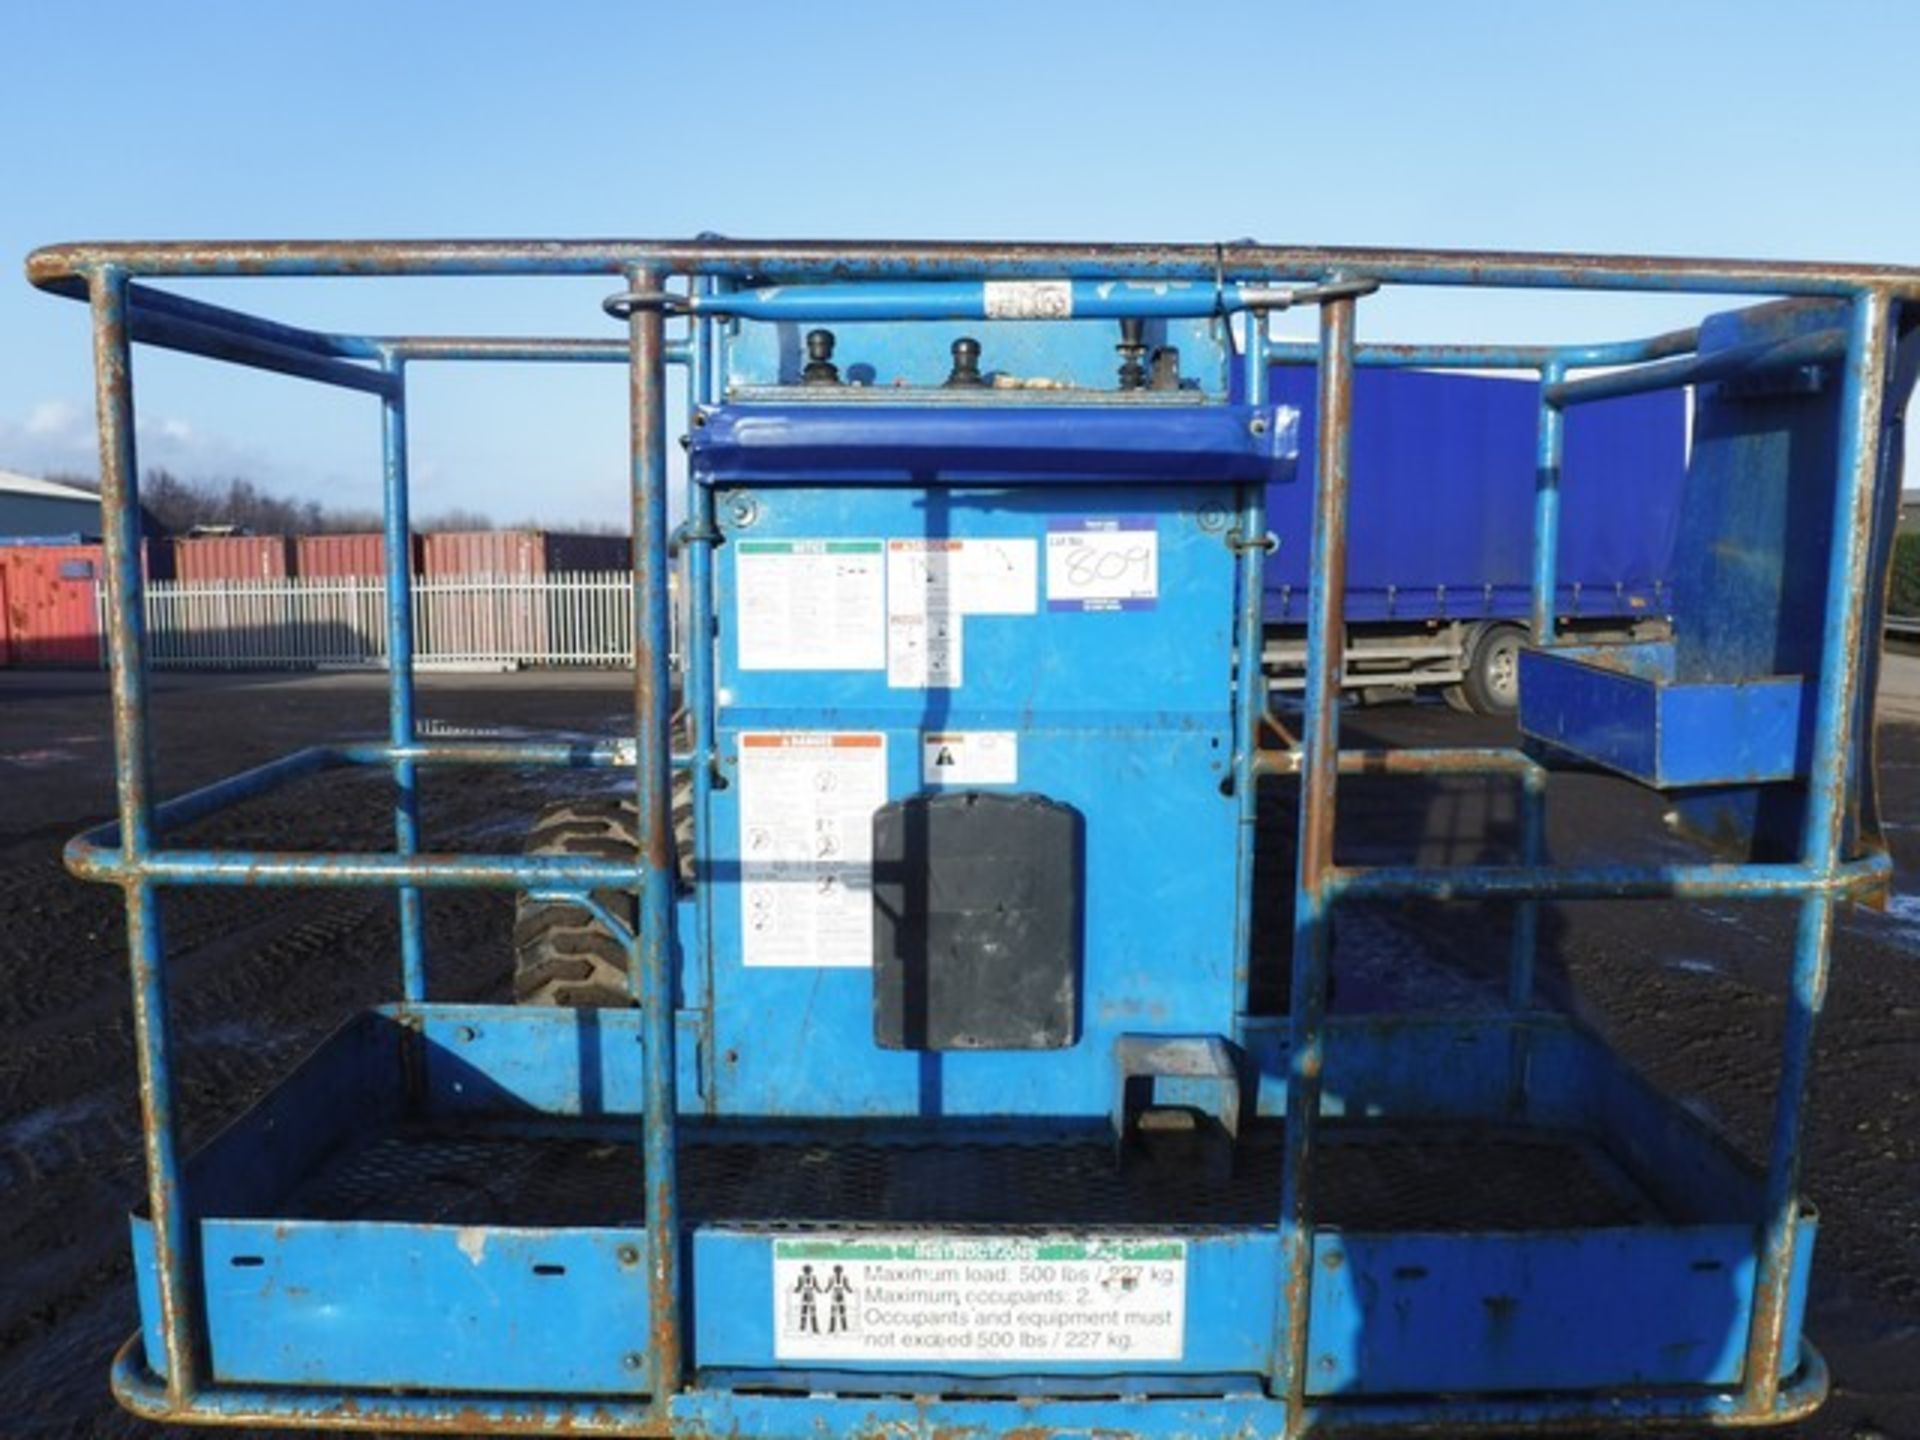 2000 GENIE MODEL Z45-25, S/N 15155, 8046HRS (NOT VERIFIED), LIFT CAPACITY - 230 - Image 6 of 17